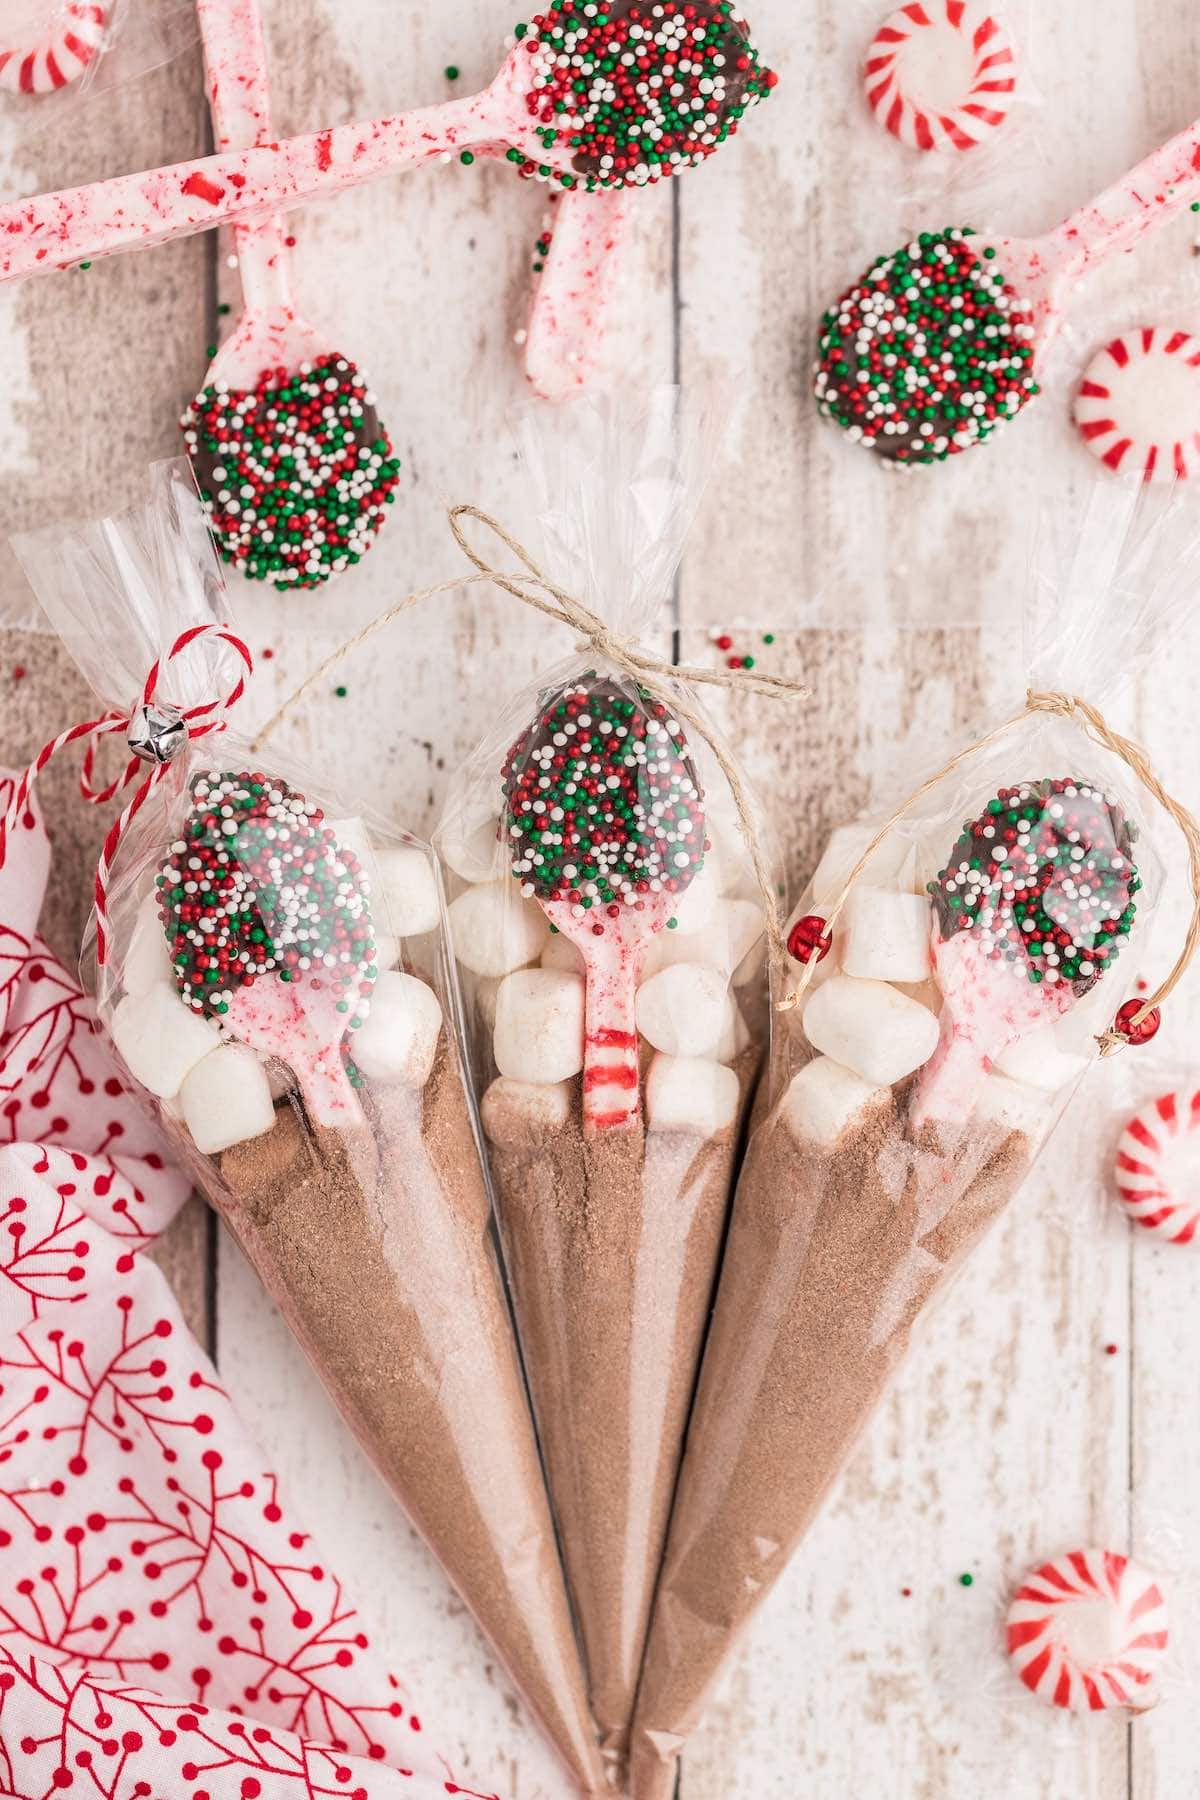 3 gift bags with peppermint candy spoon in each bag.